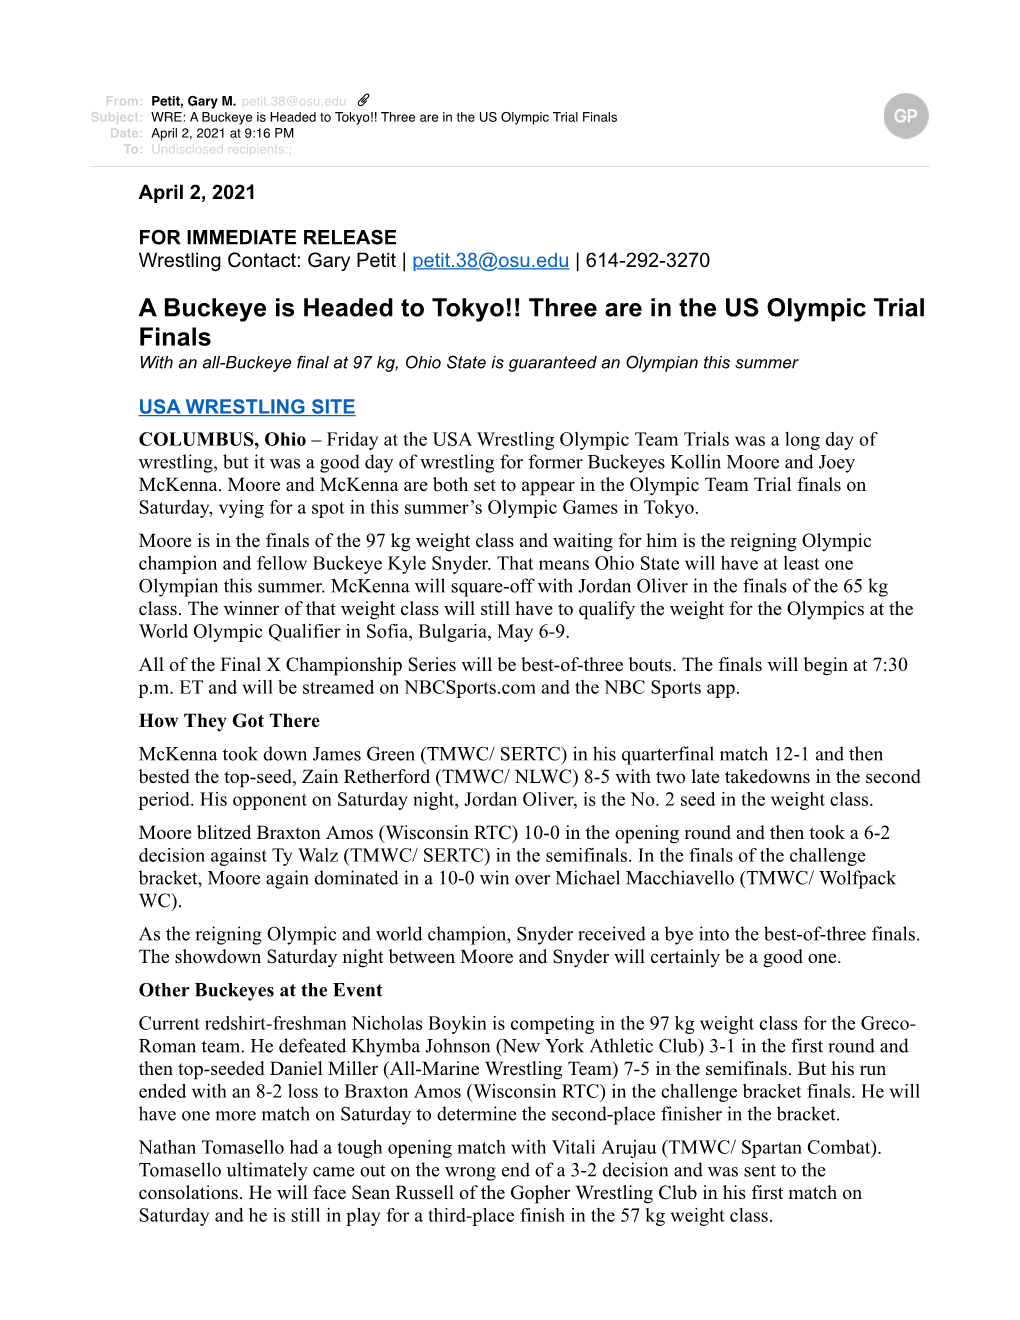 WRE a Buckeye Is Headed to Tokyo Three Are in the US Olympic Trial